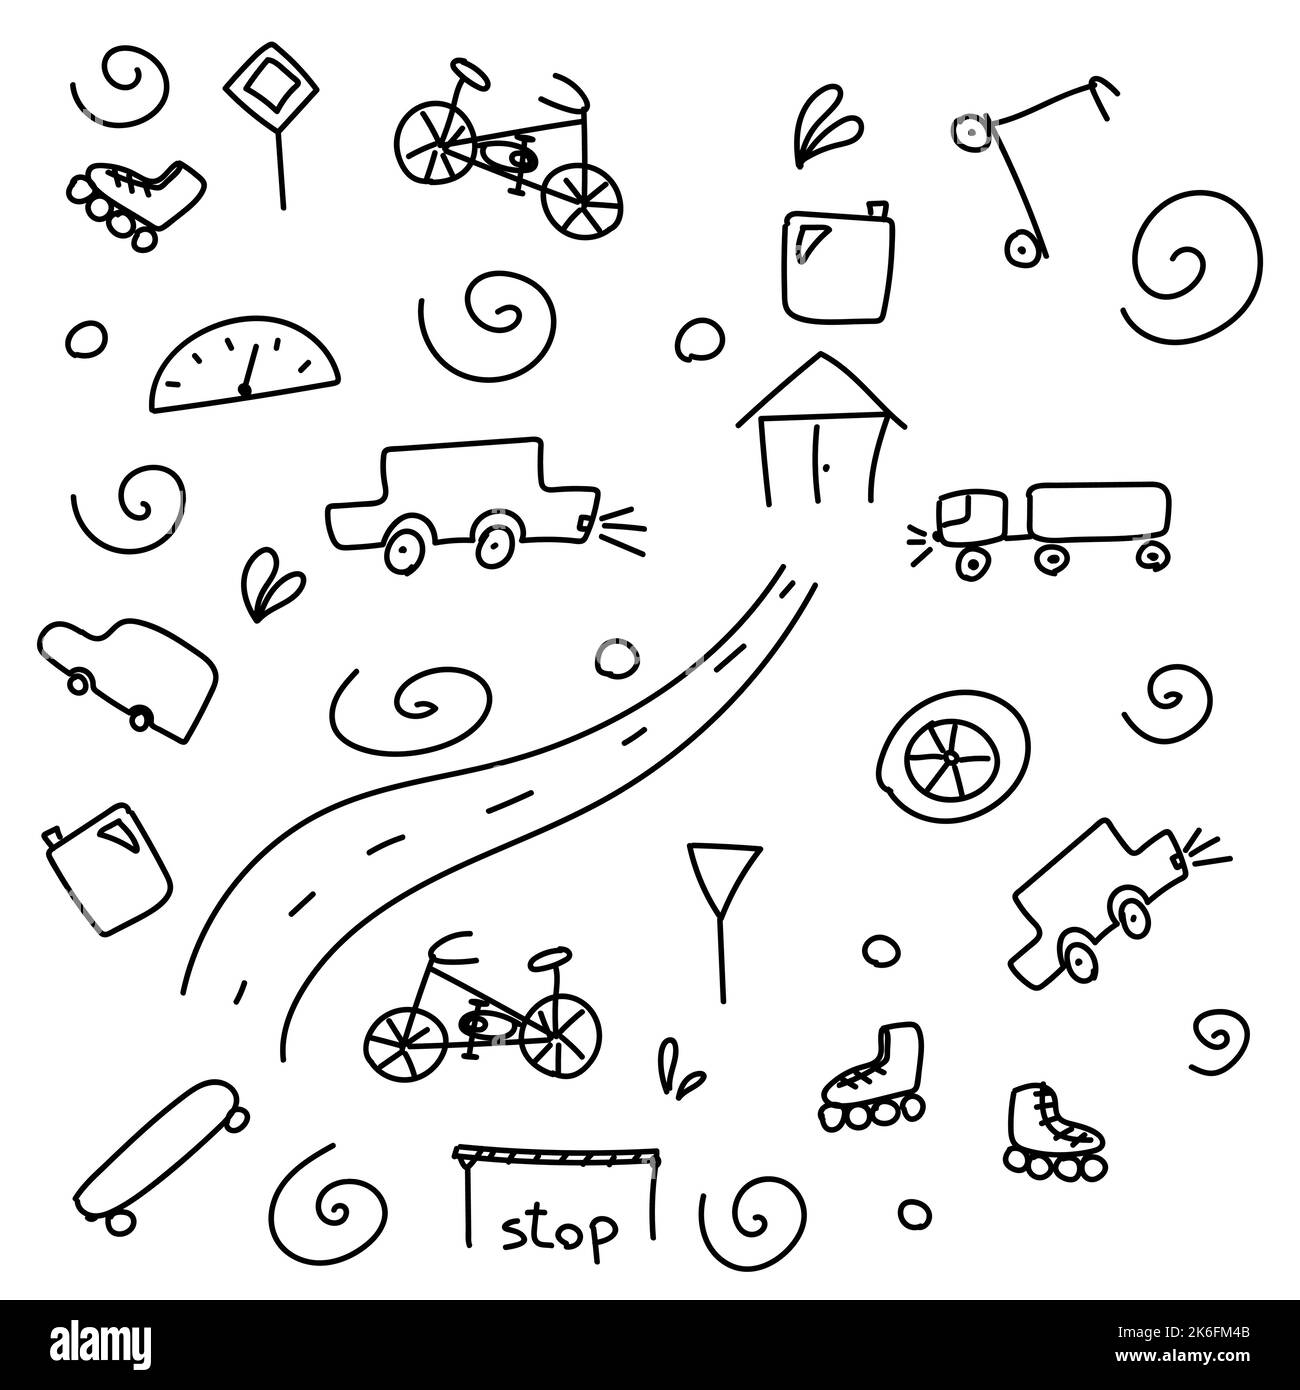 Doodle from childrens drawings of transport cars  Stock Vector